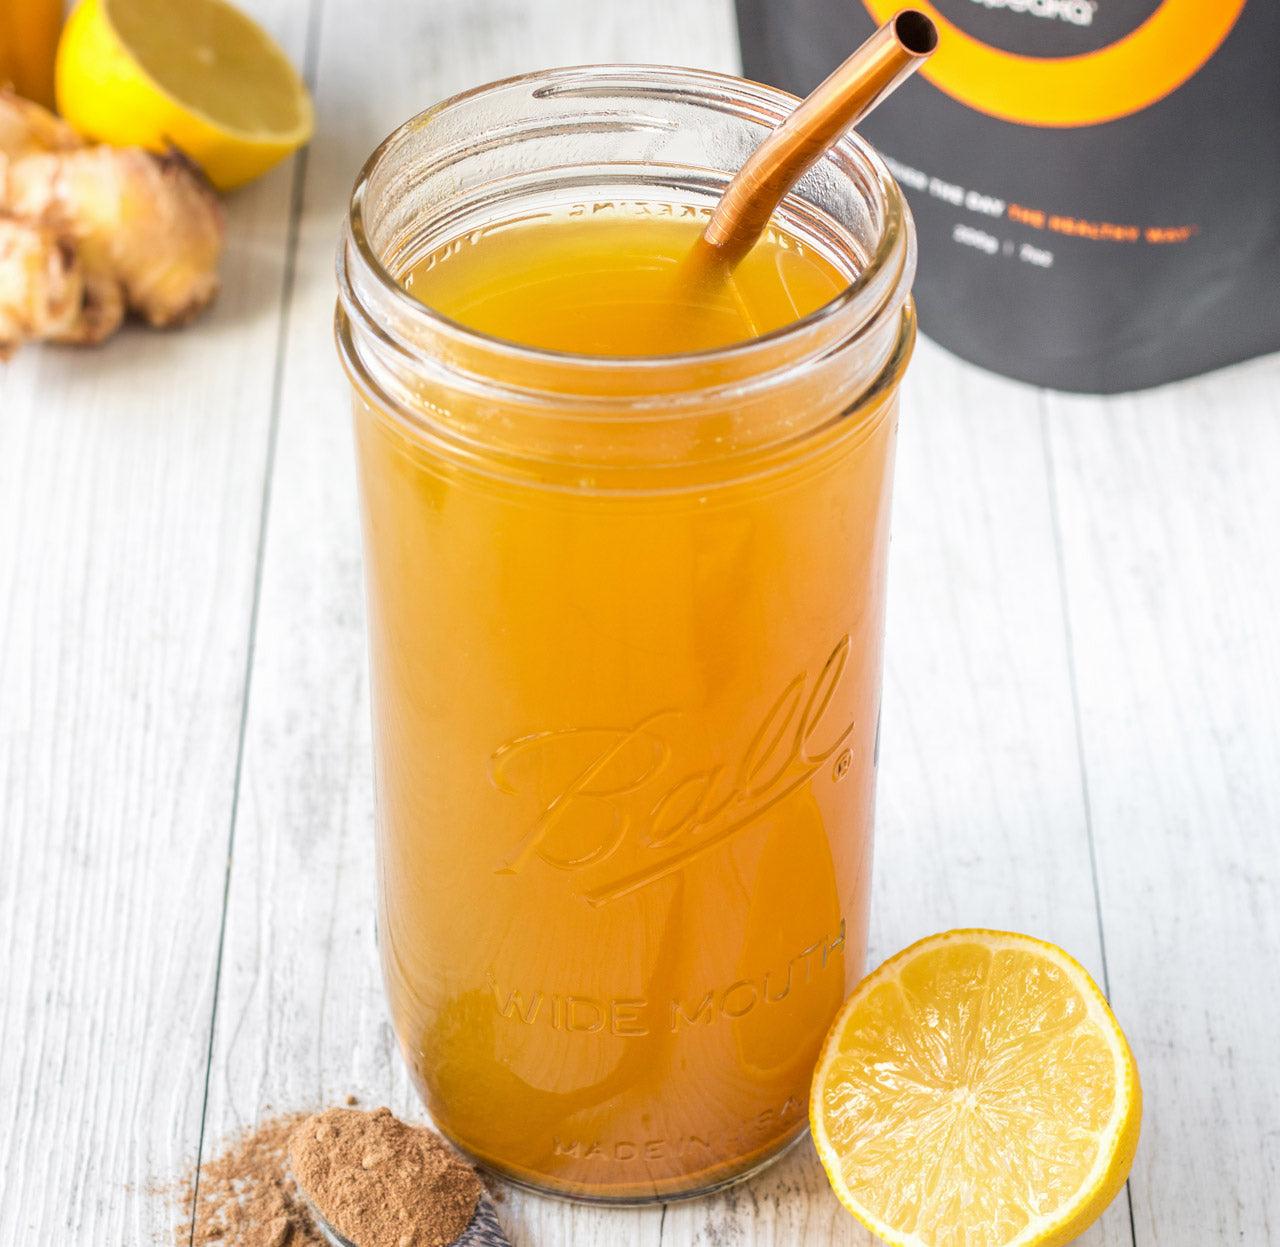 A mason jar of golden turmeric tea sits on a white table, with a lemon wedge and a pile of spice powder next to it.